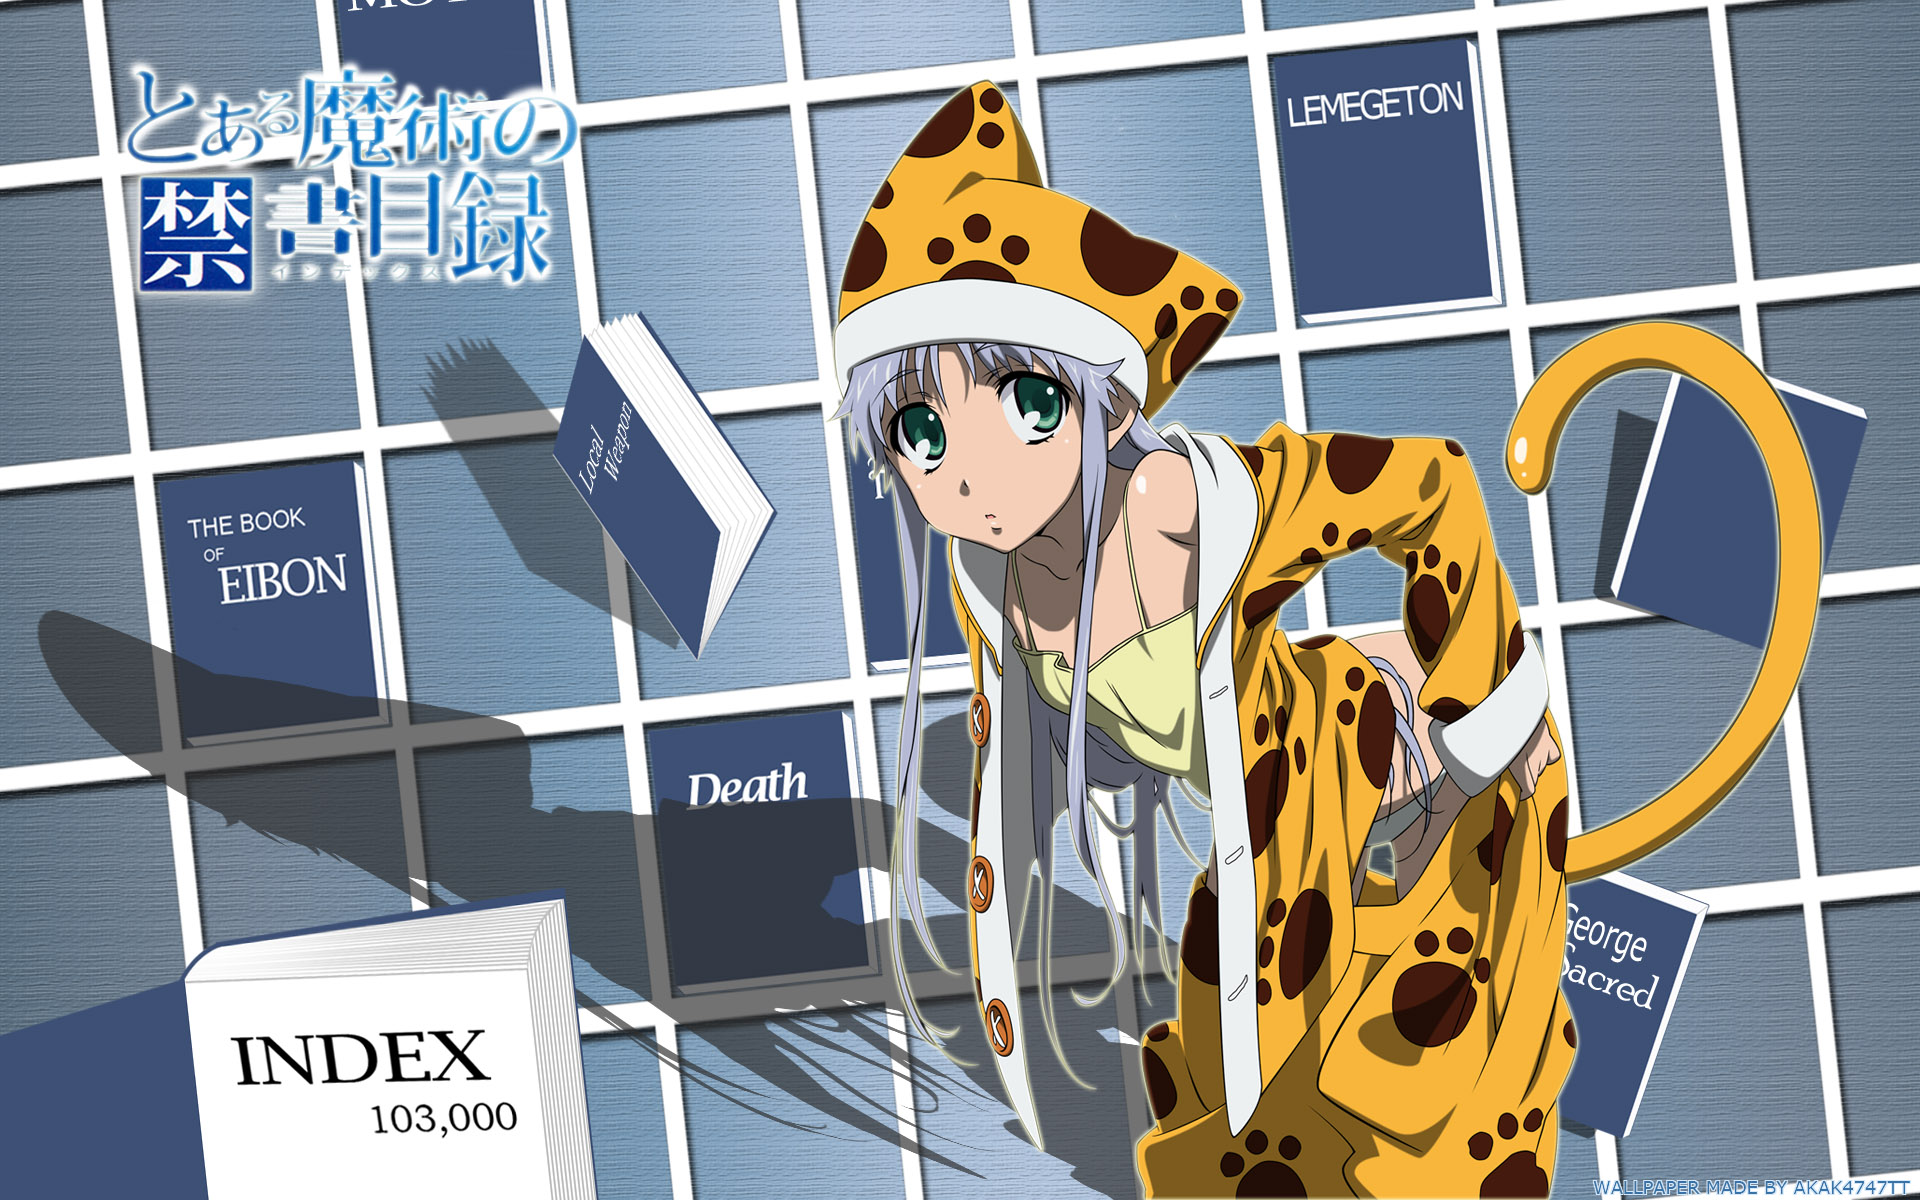 Anime A Certain Magical Index HD Wallpaper